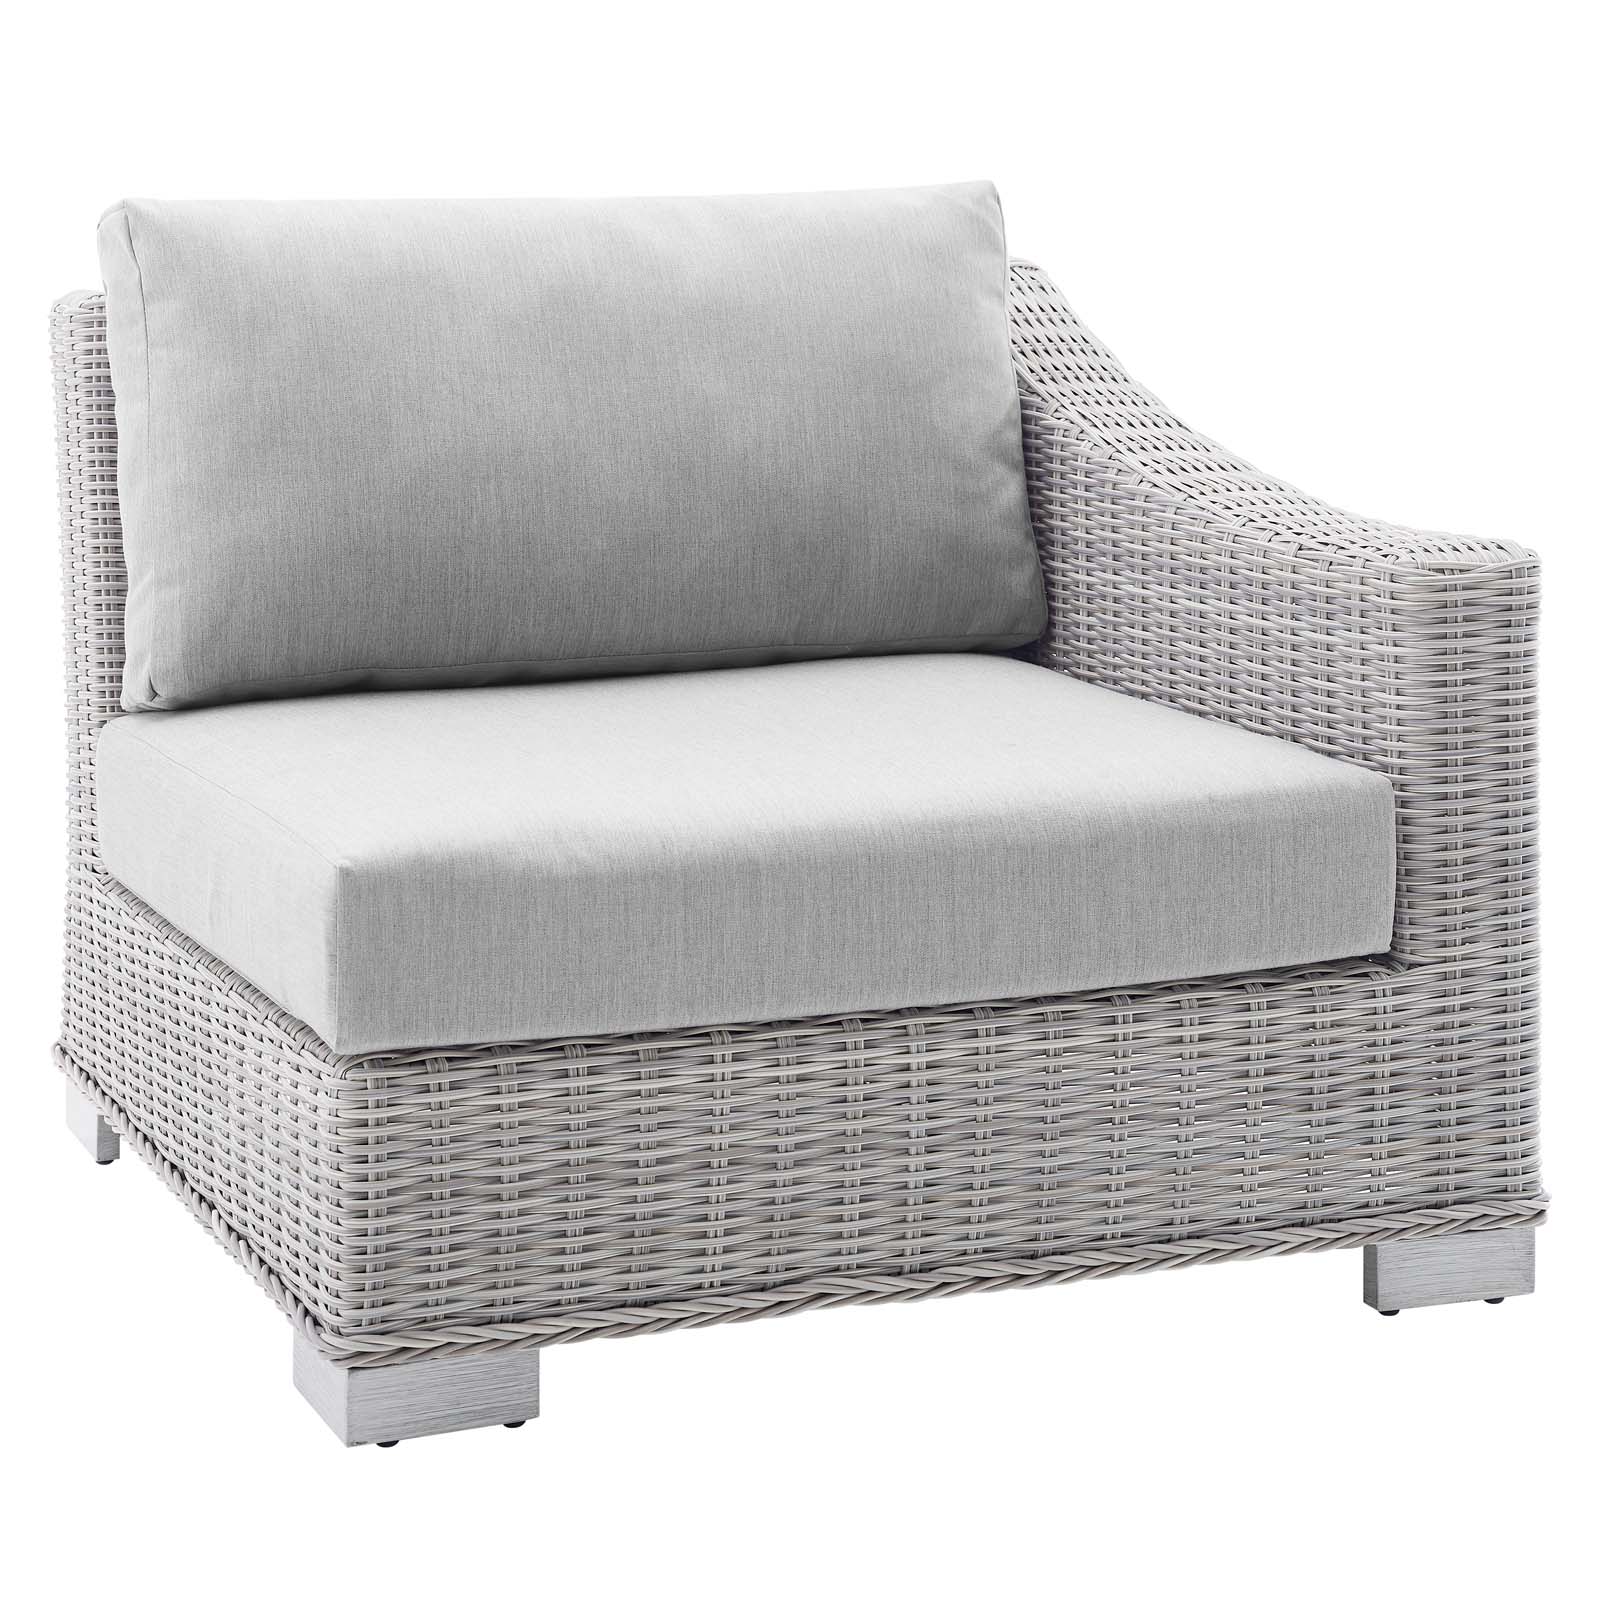 Modway Conway Sunbrella® Outdoor Patio Wicker Rattan Right-Arm Chair in Light Gray Gray - image 2 of 9